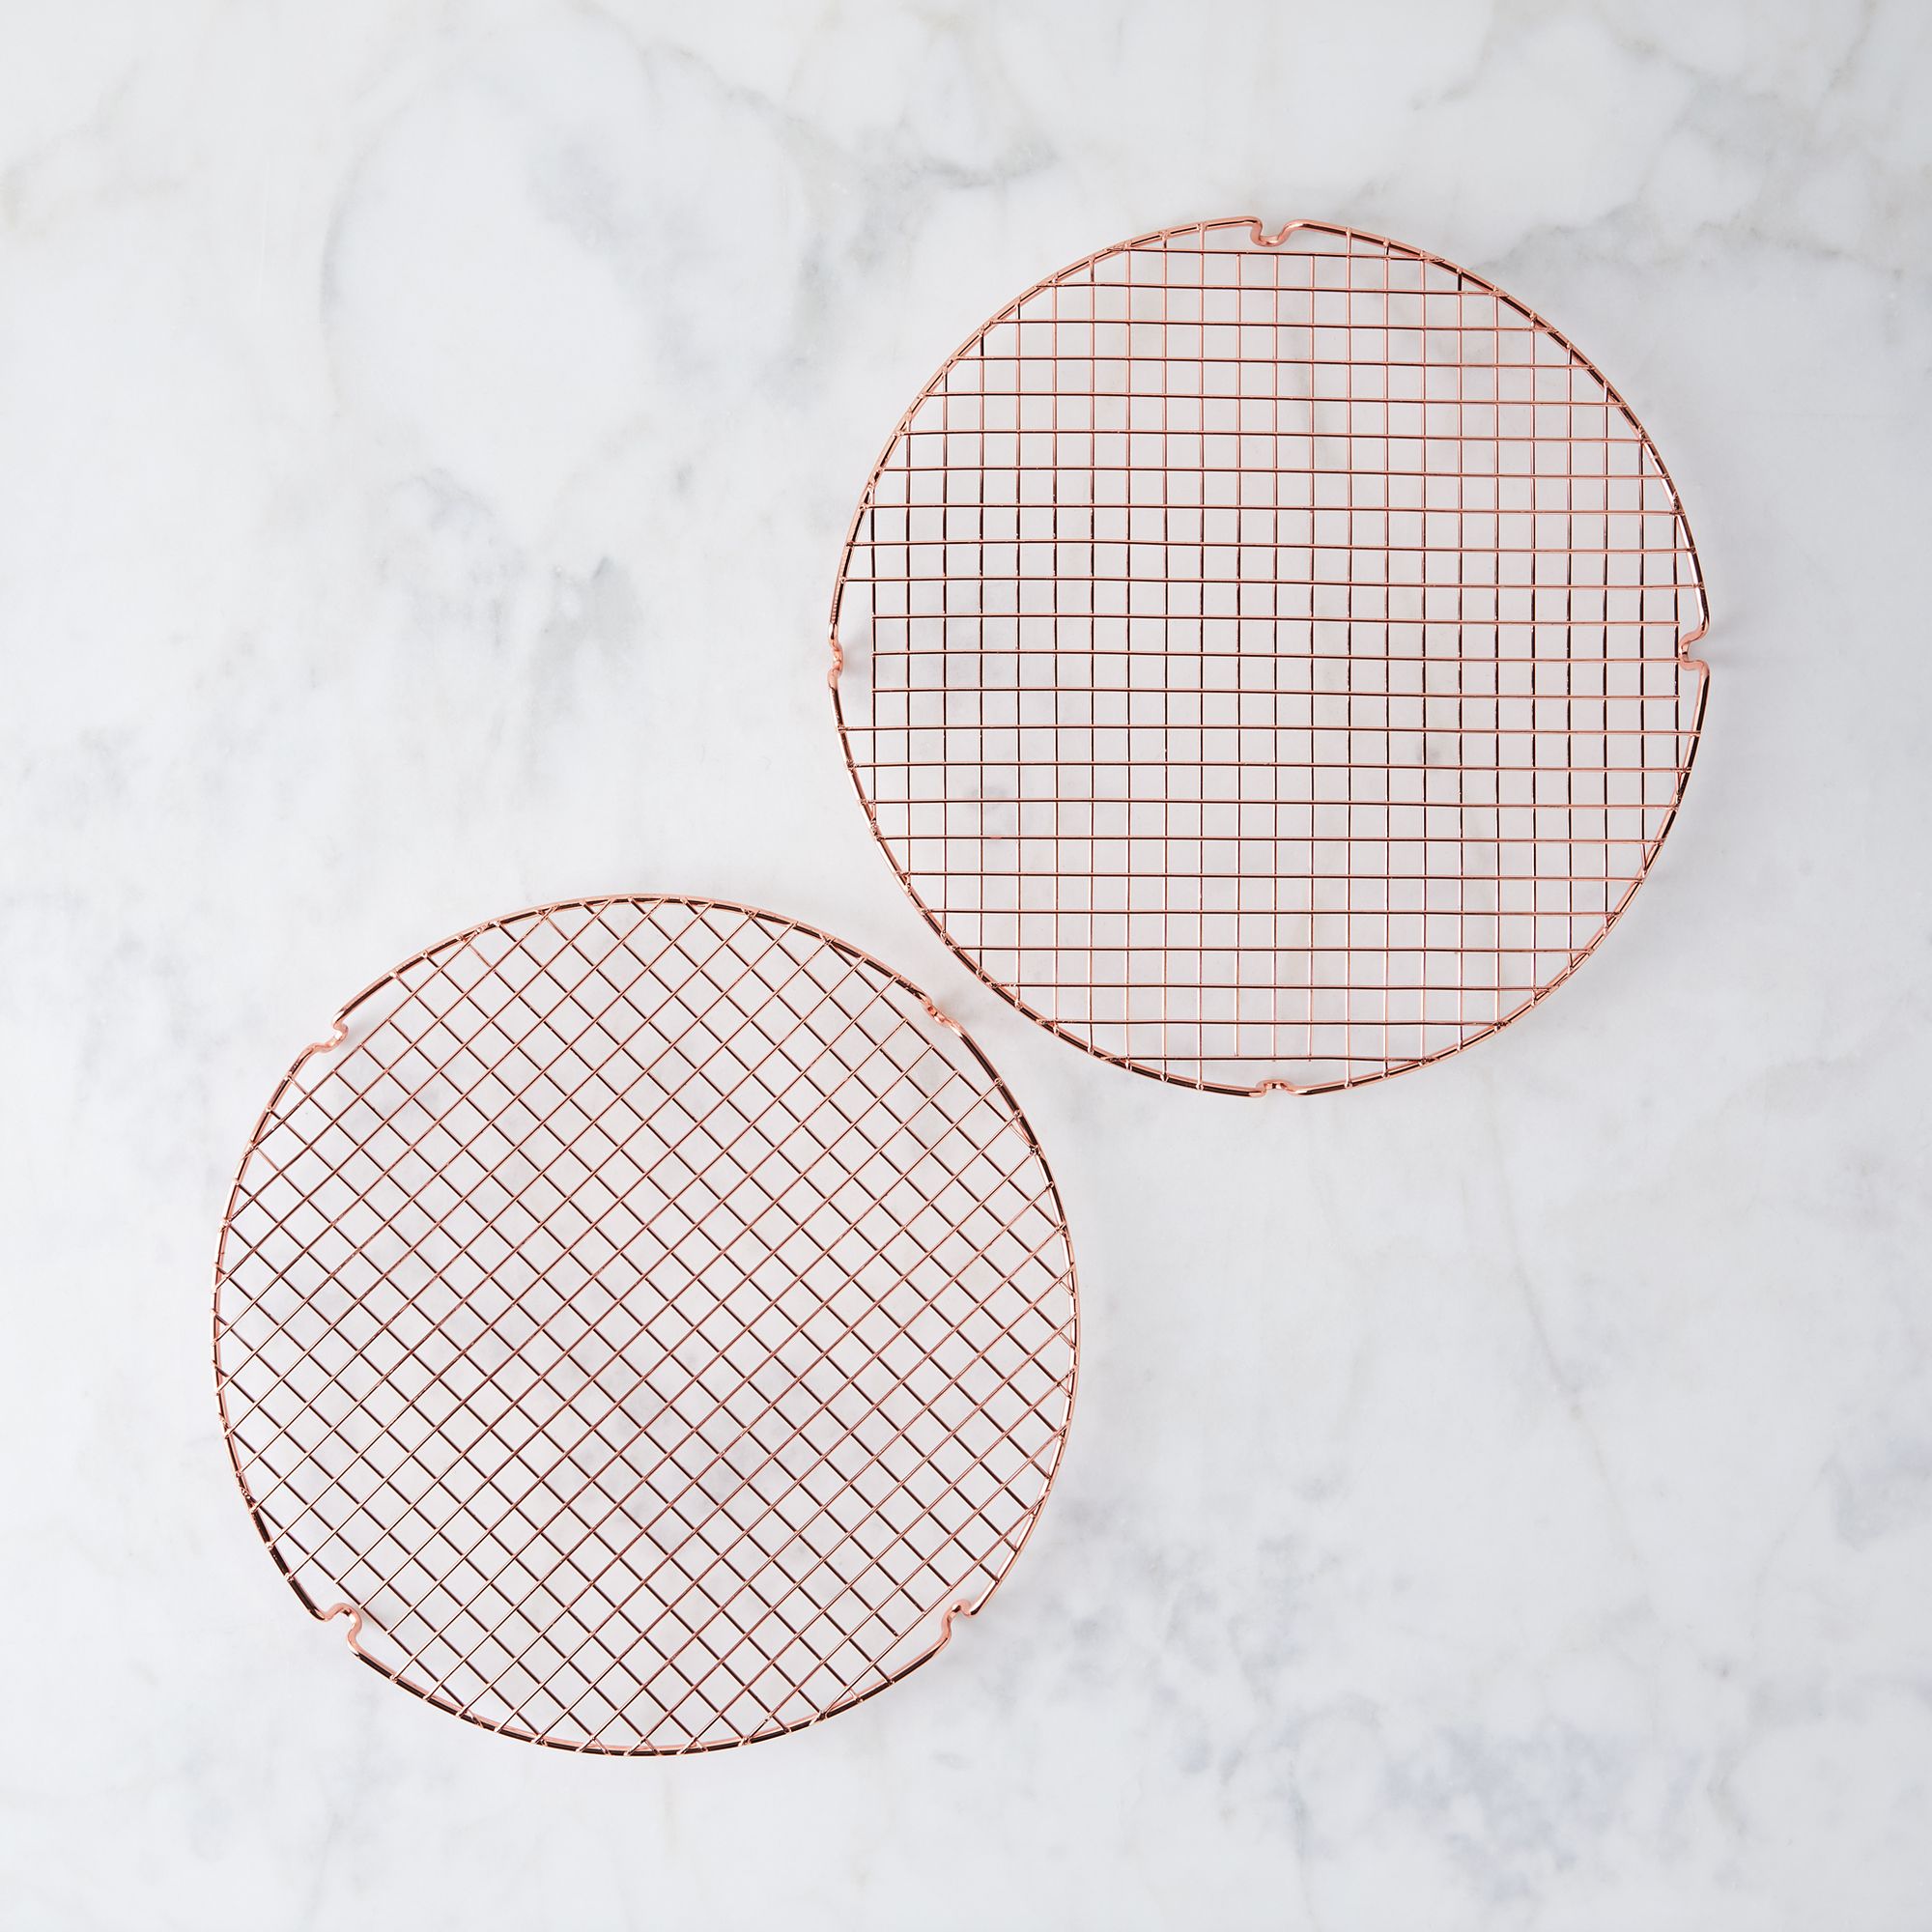 Nordic Ware Copper-Plated Cooling Racks, Set of 2 Round Grids